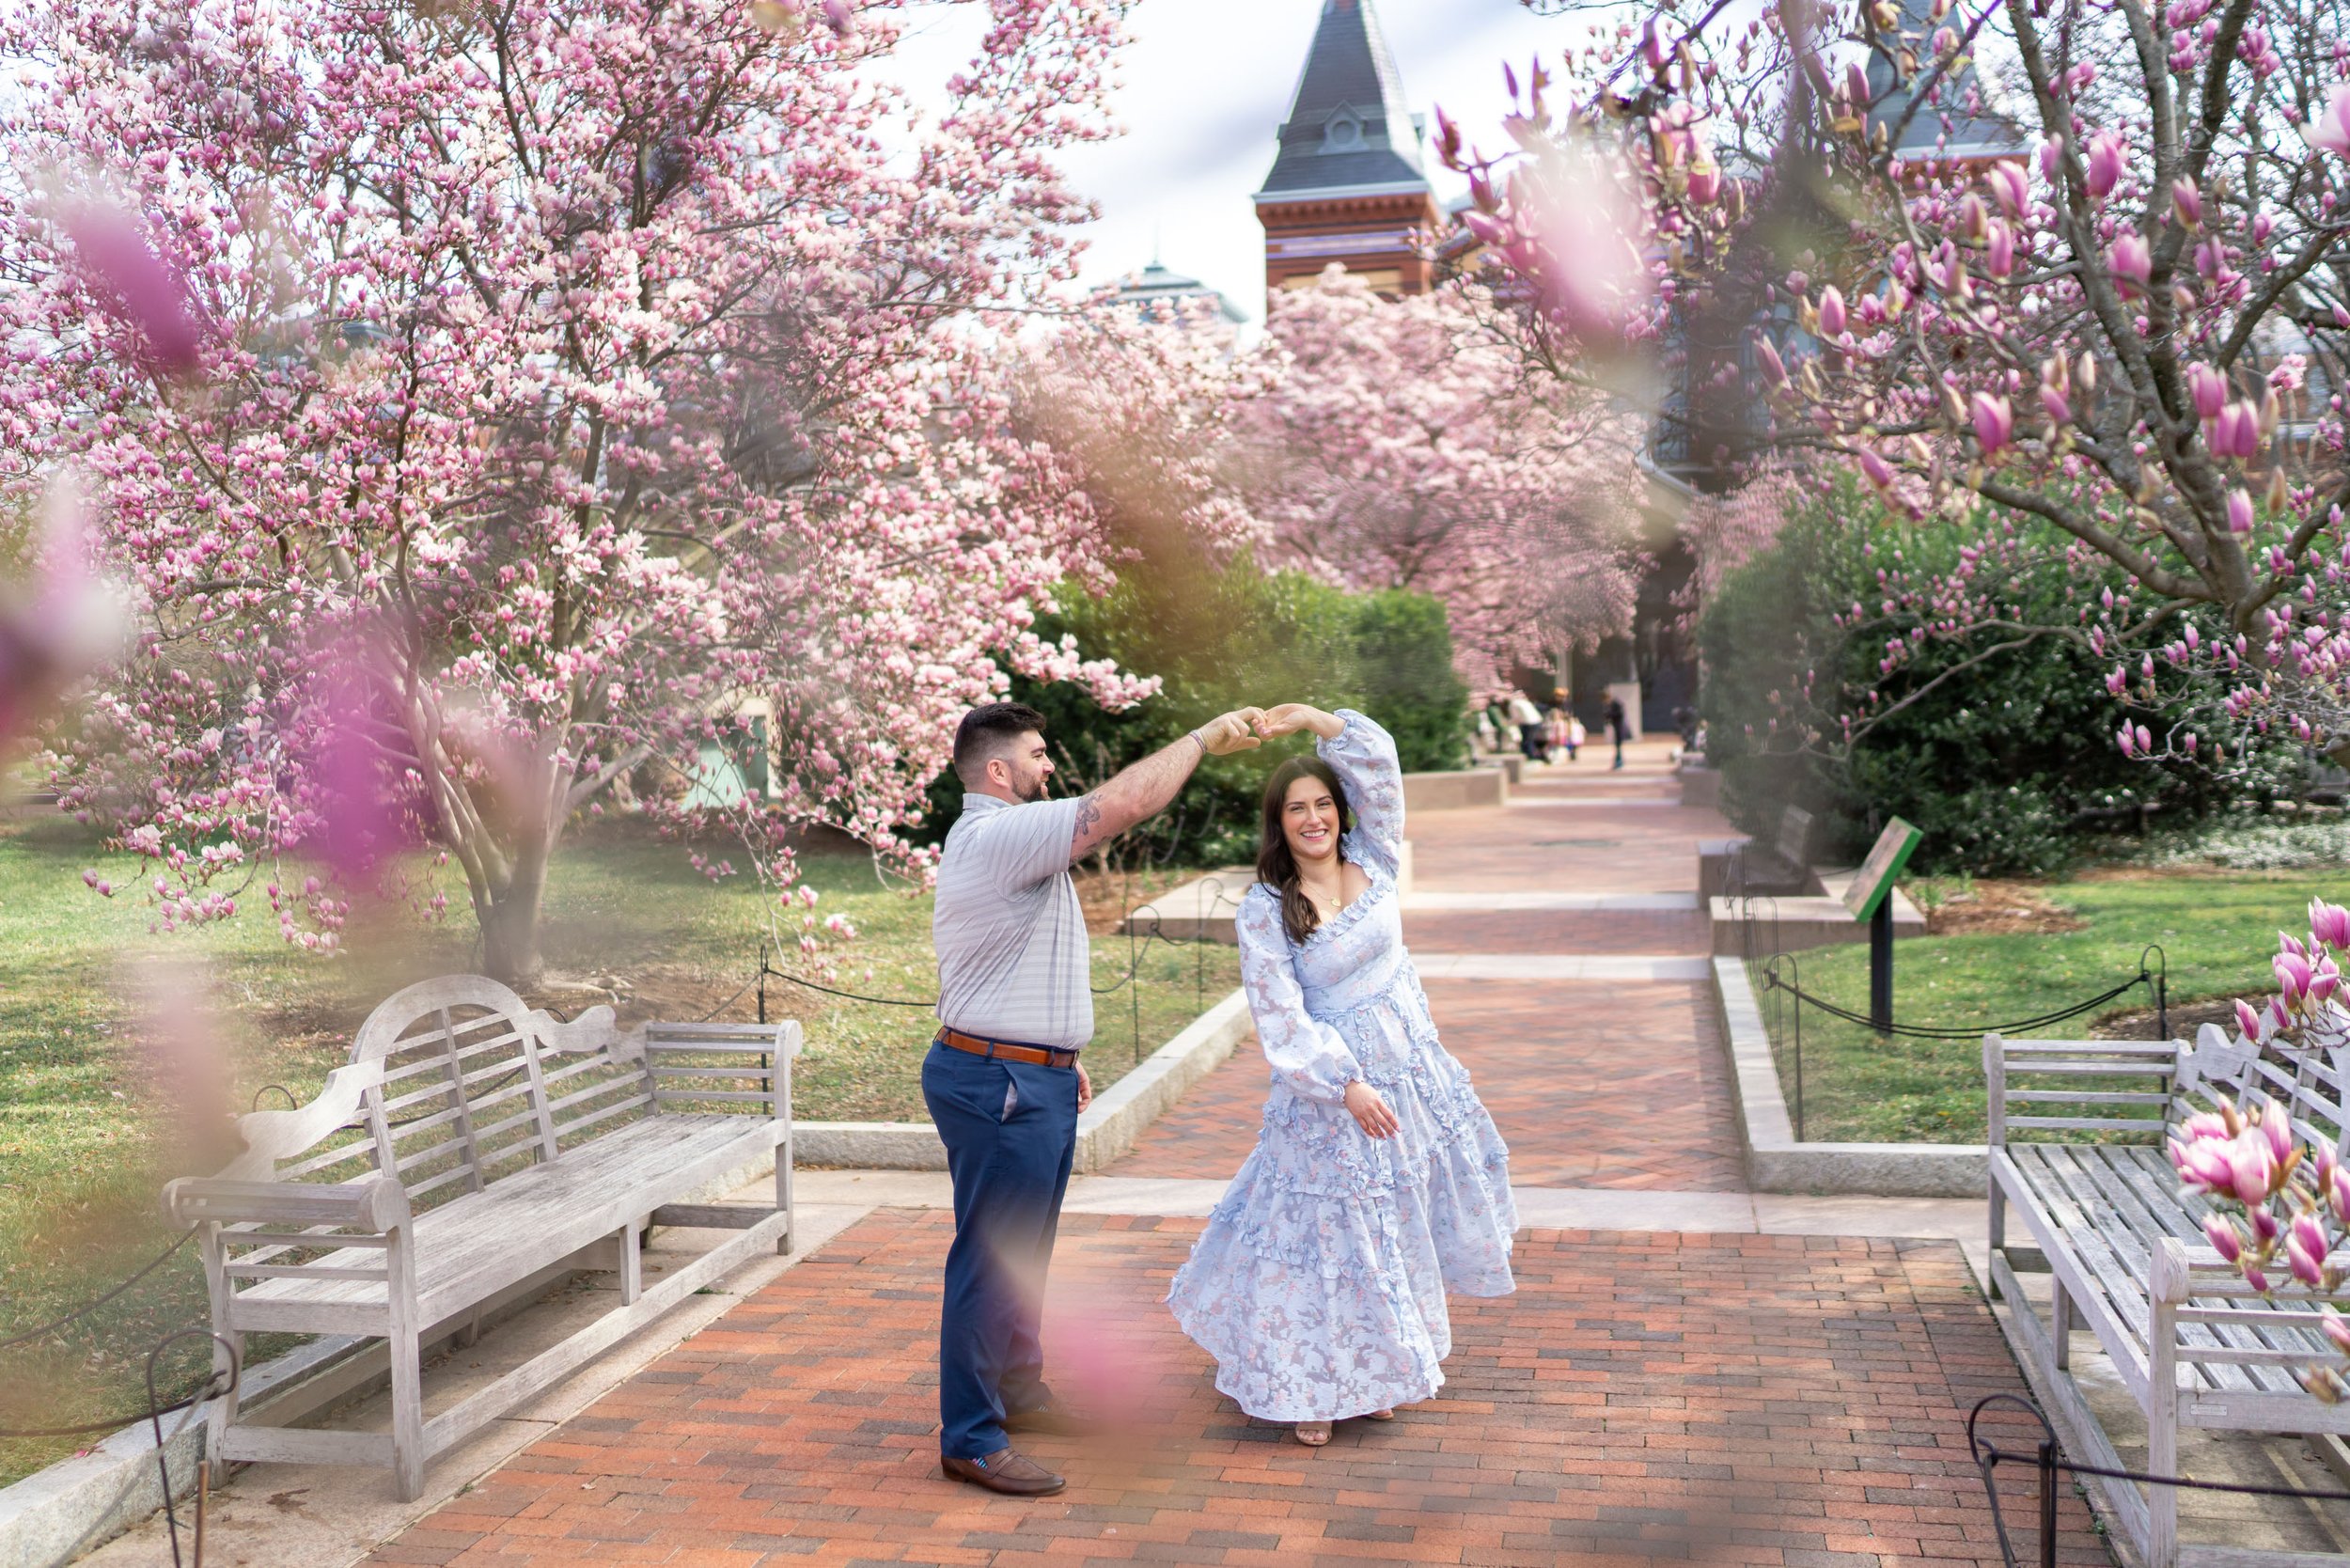 Groom twirling his bride at the Enid A Haupt garden with magnolias